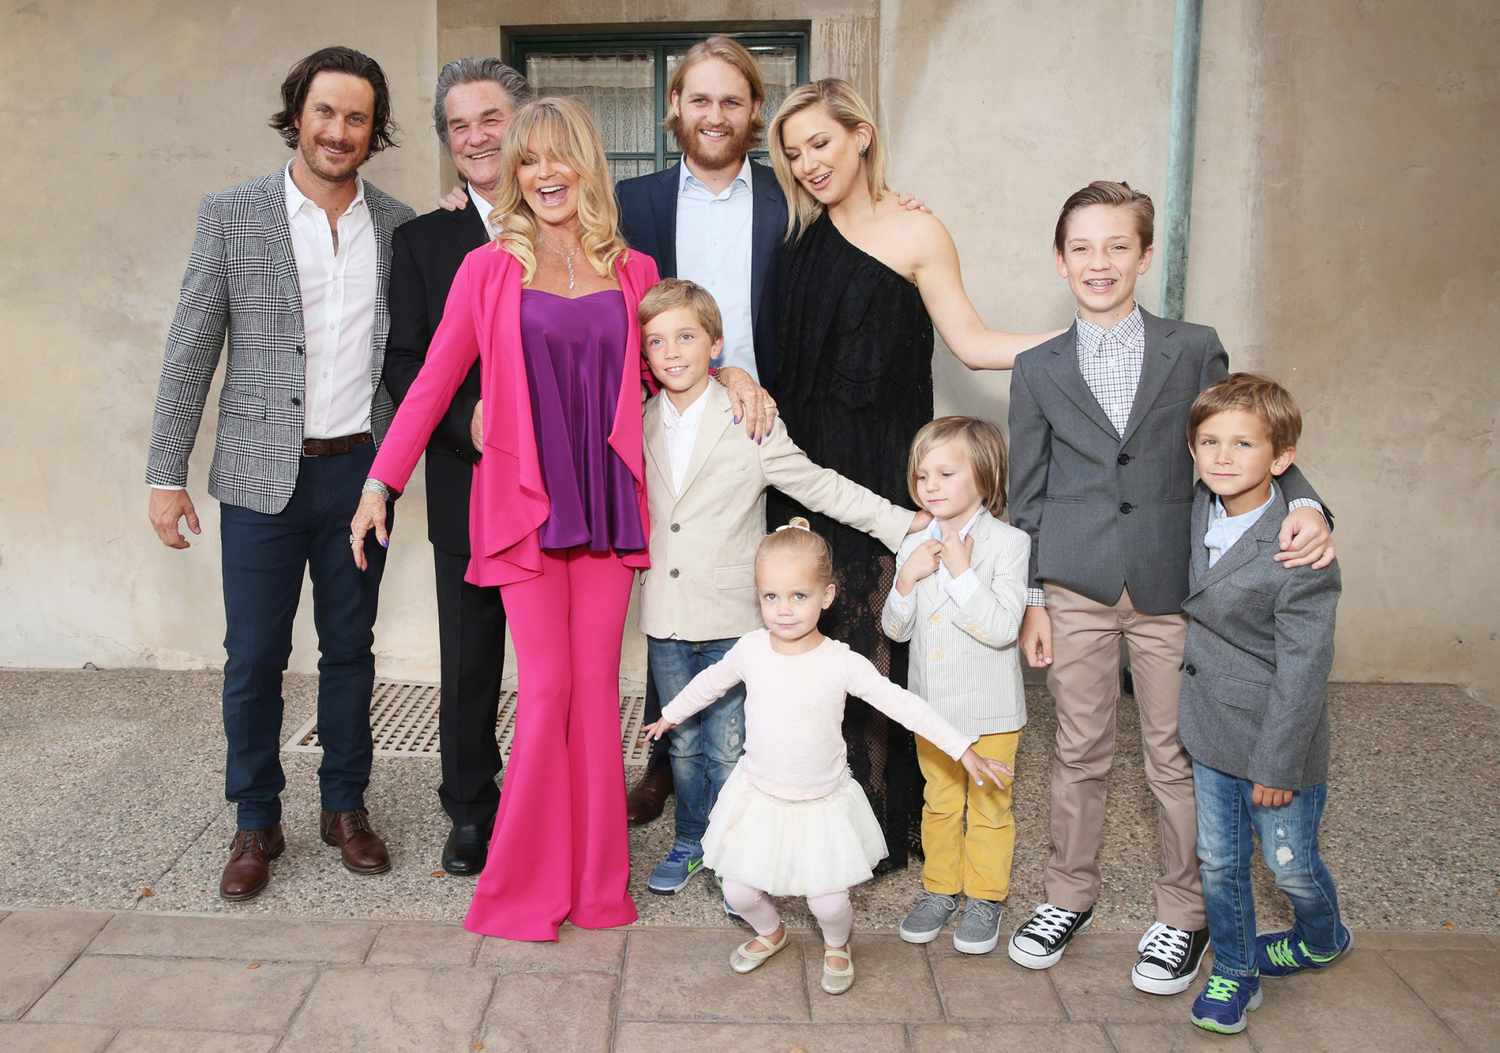 Oliver Hudson, Kurt Russell, Goldie Hawn, Wyatt Russell and Kate Hudson with kids Ryder Robinson, Wilder Hudson, Bodhi Hudson, Rio Hudson and Bingham Bellamy